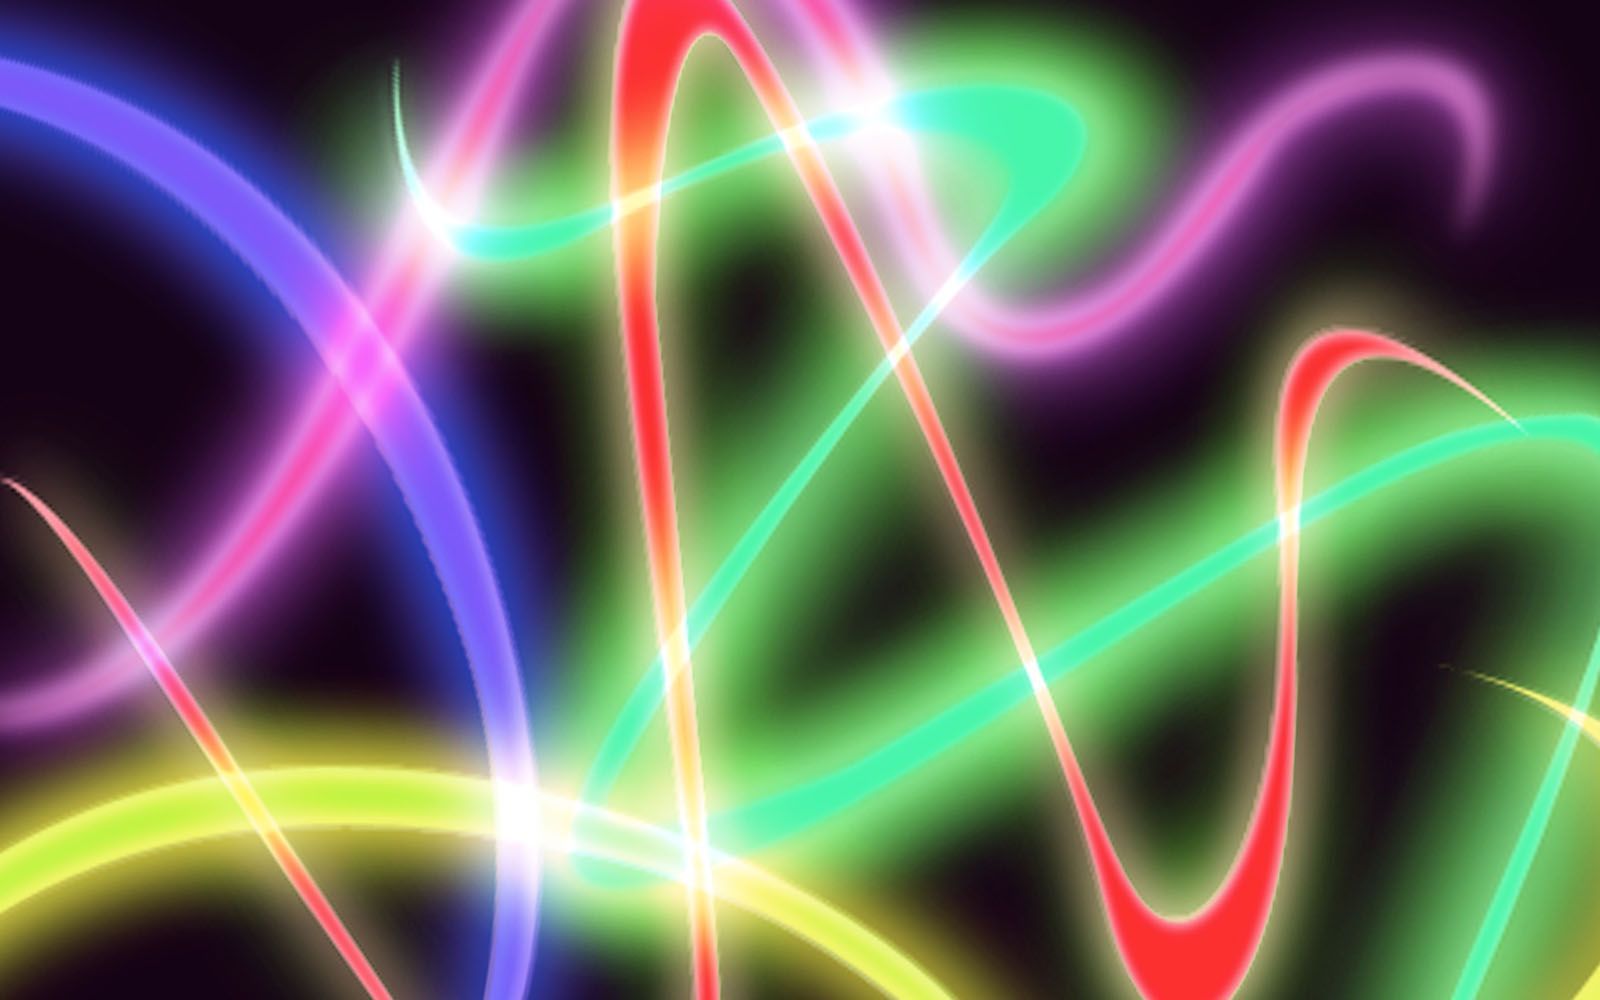 Neon Background. wallpaper: Abstract Neon Wallpaper. Neon wallpaper, Neon background, Neon